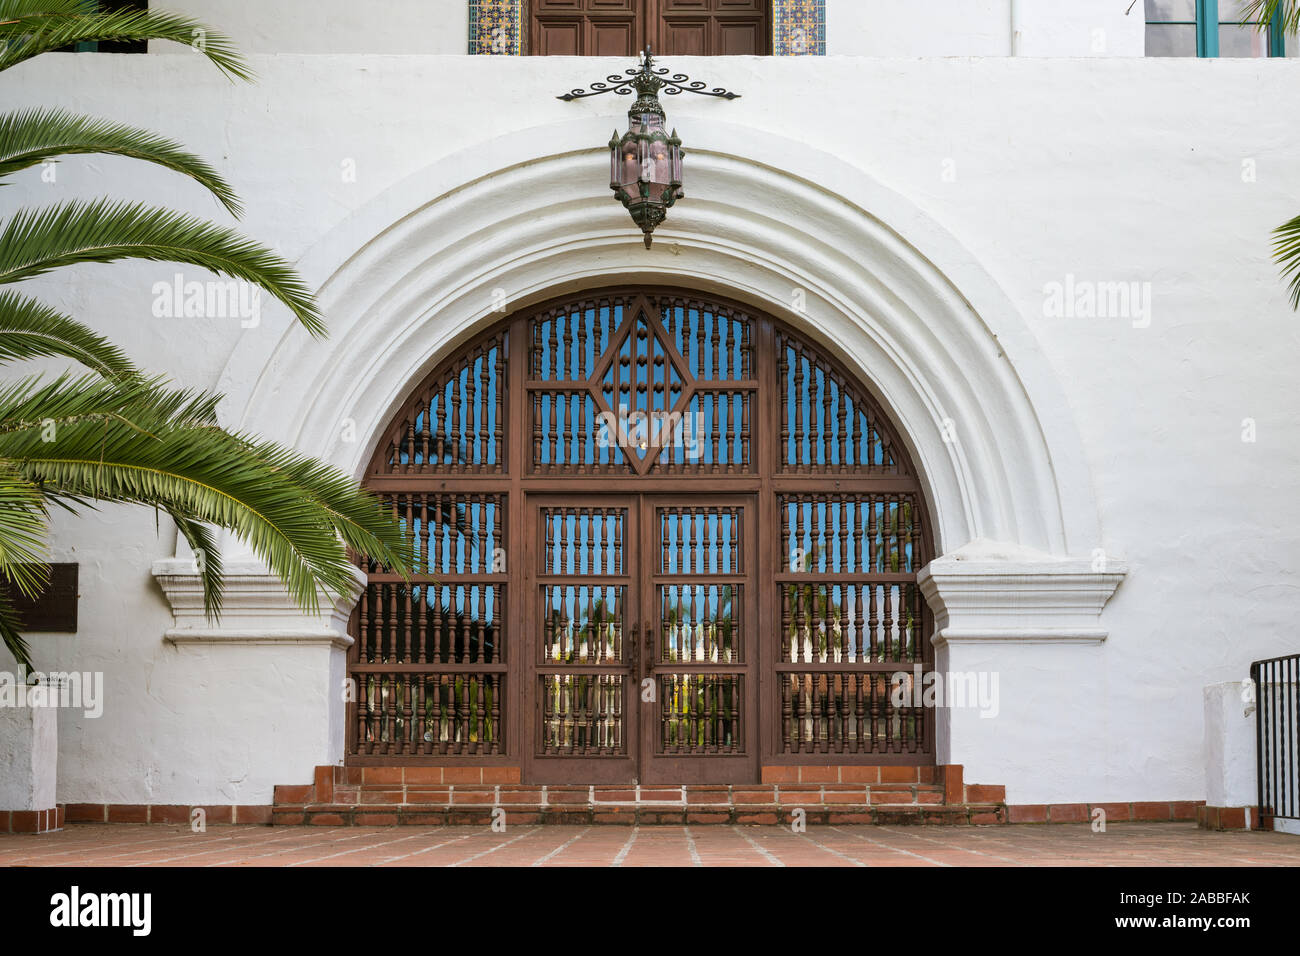 Large ornate wood door in an arched entrance to an historic white Spanish style building in Santa Barbara, California, USA Stock Photo